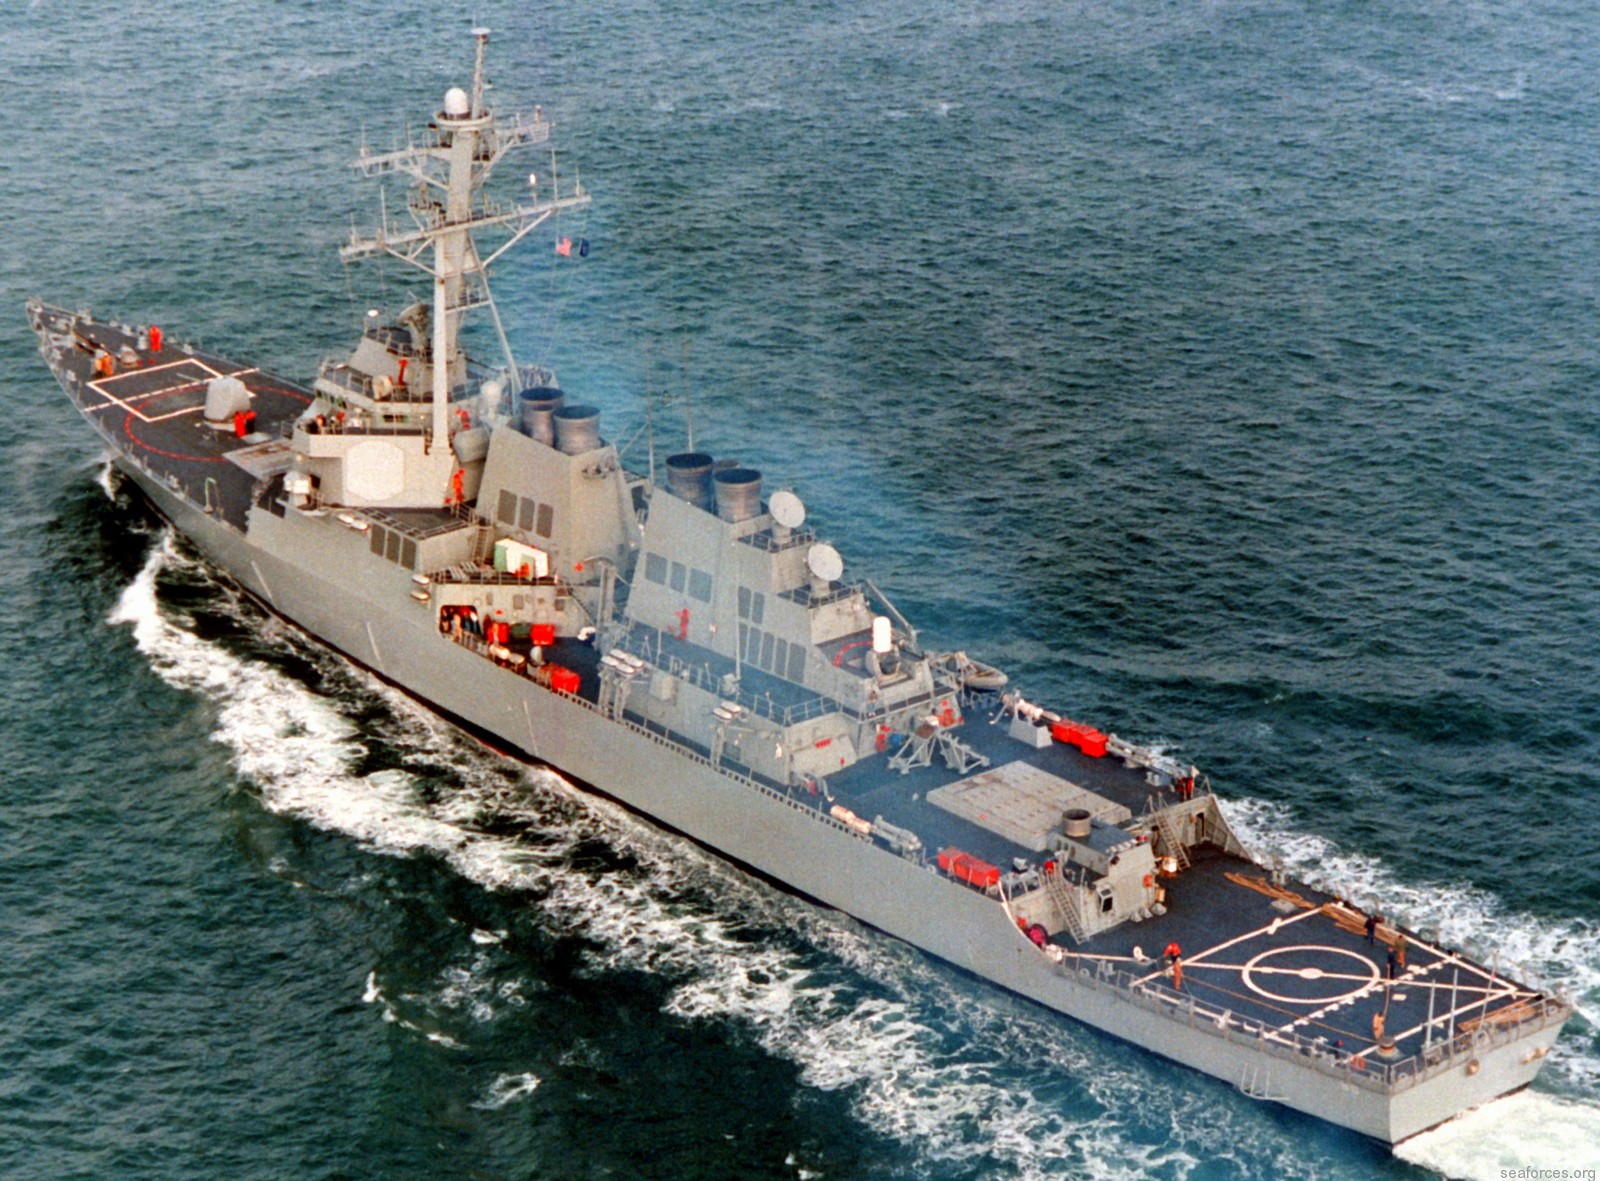 ddg-60 uss paul hamilton guided missile destroyer us navy 54